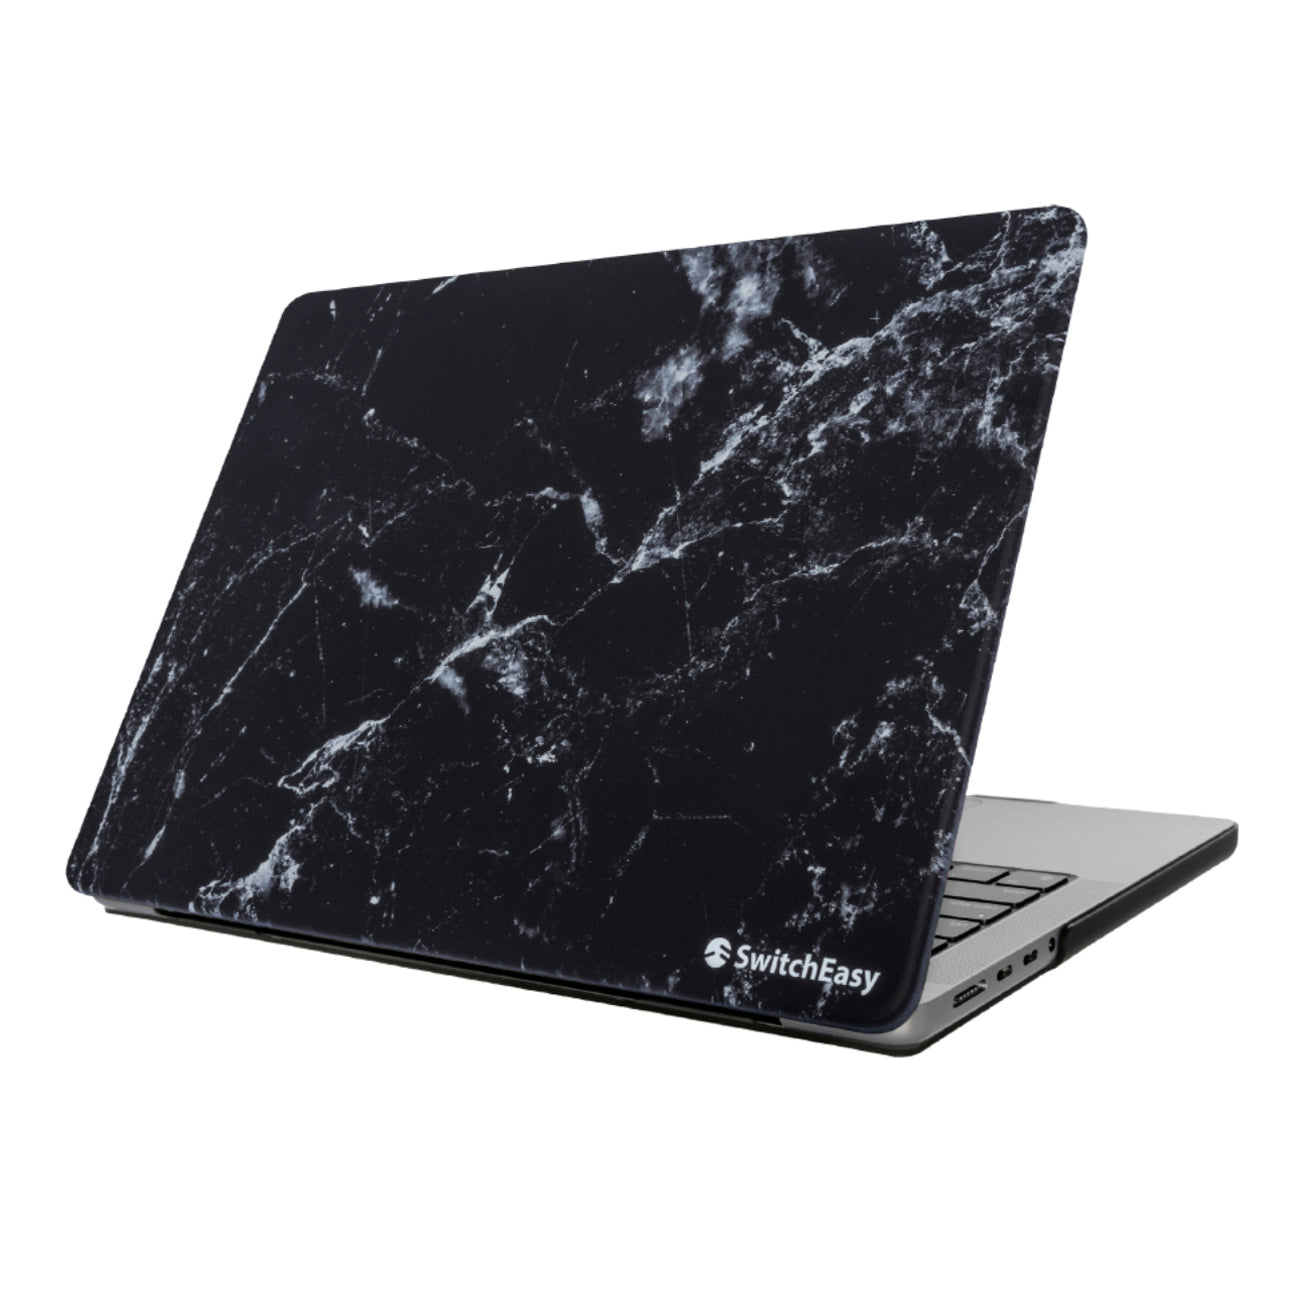 SwitchEasy Marble MacBook Protective Case for MacBook Pro 13"(M1/Intel) Default SwitchEasy Black Marble 